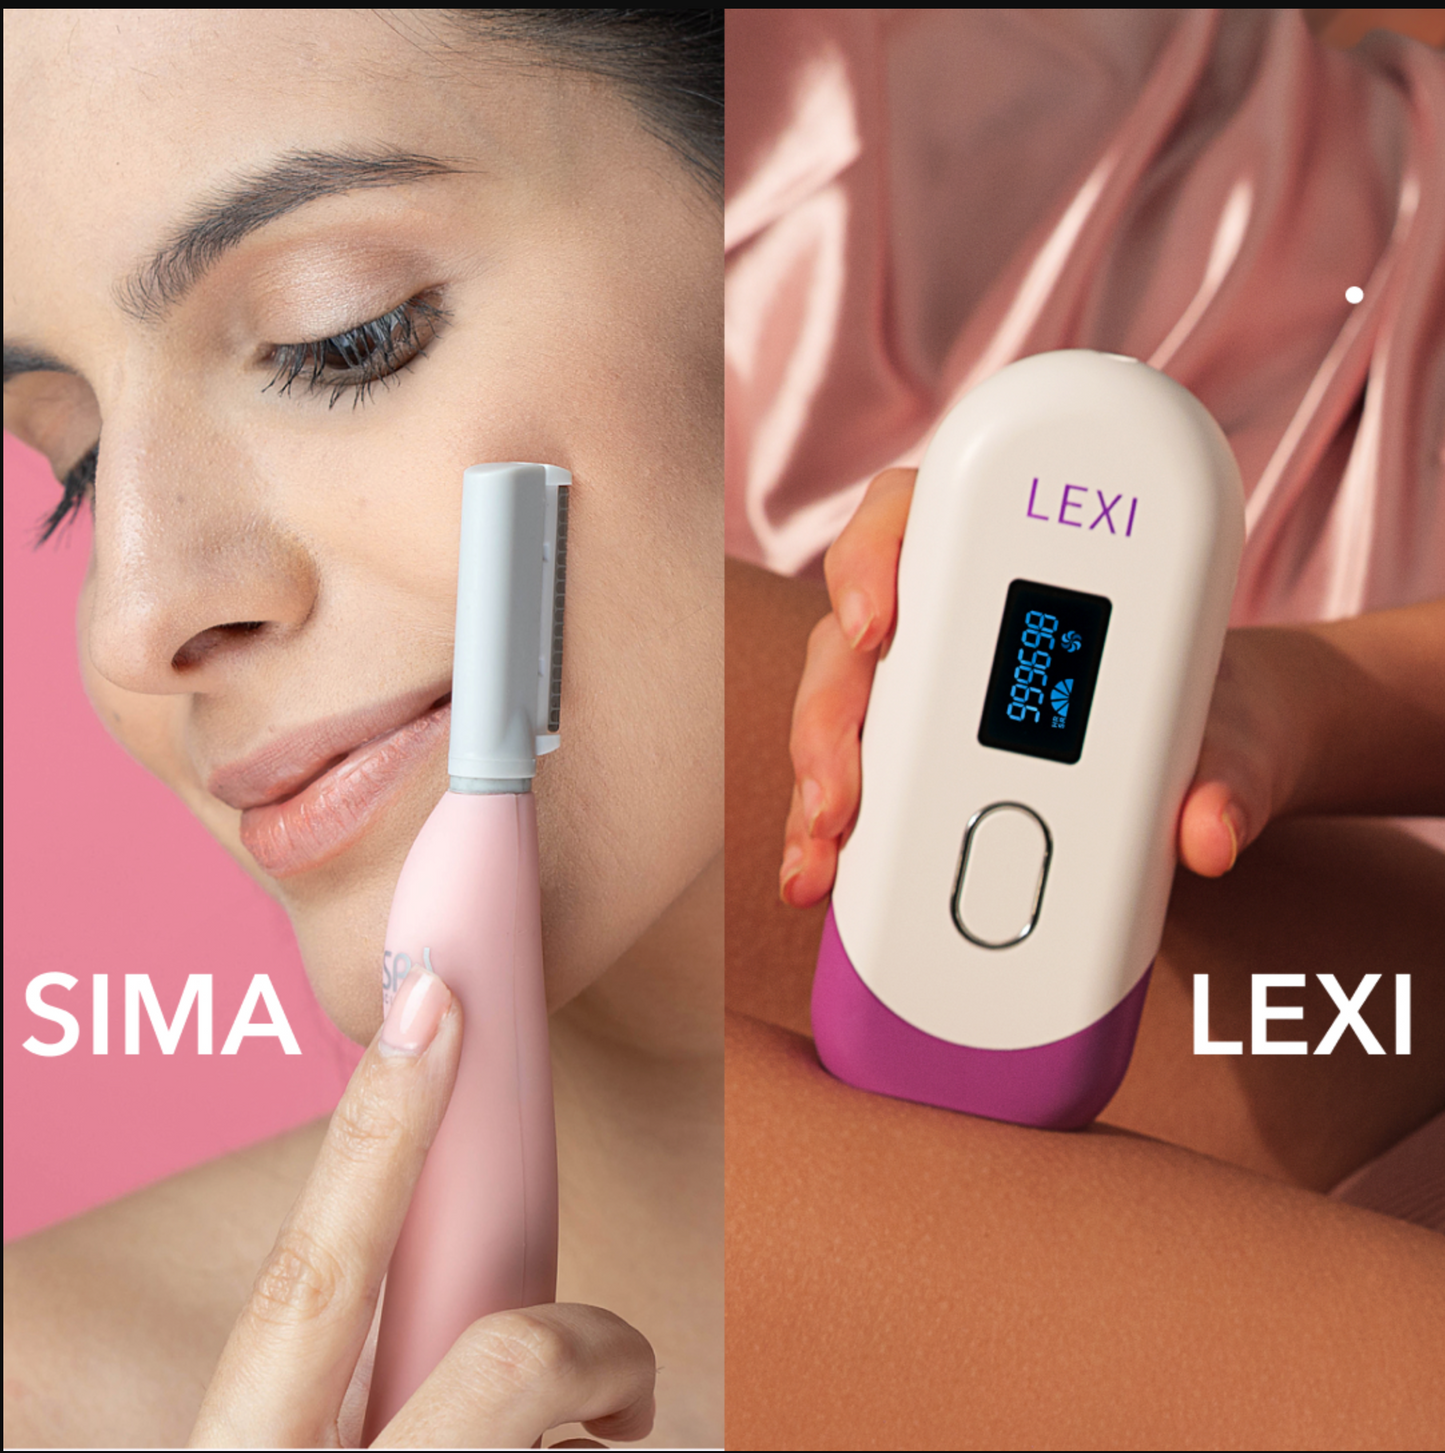 Compare Lexi Sima's experience with Spa Sciences Hairless Face & Body Set for unwanted hair removal and IPL therapy.